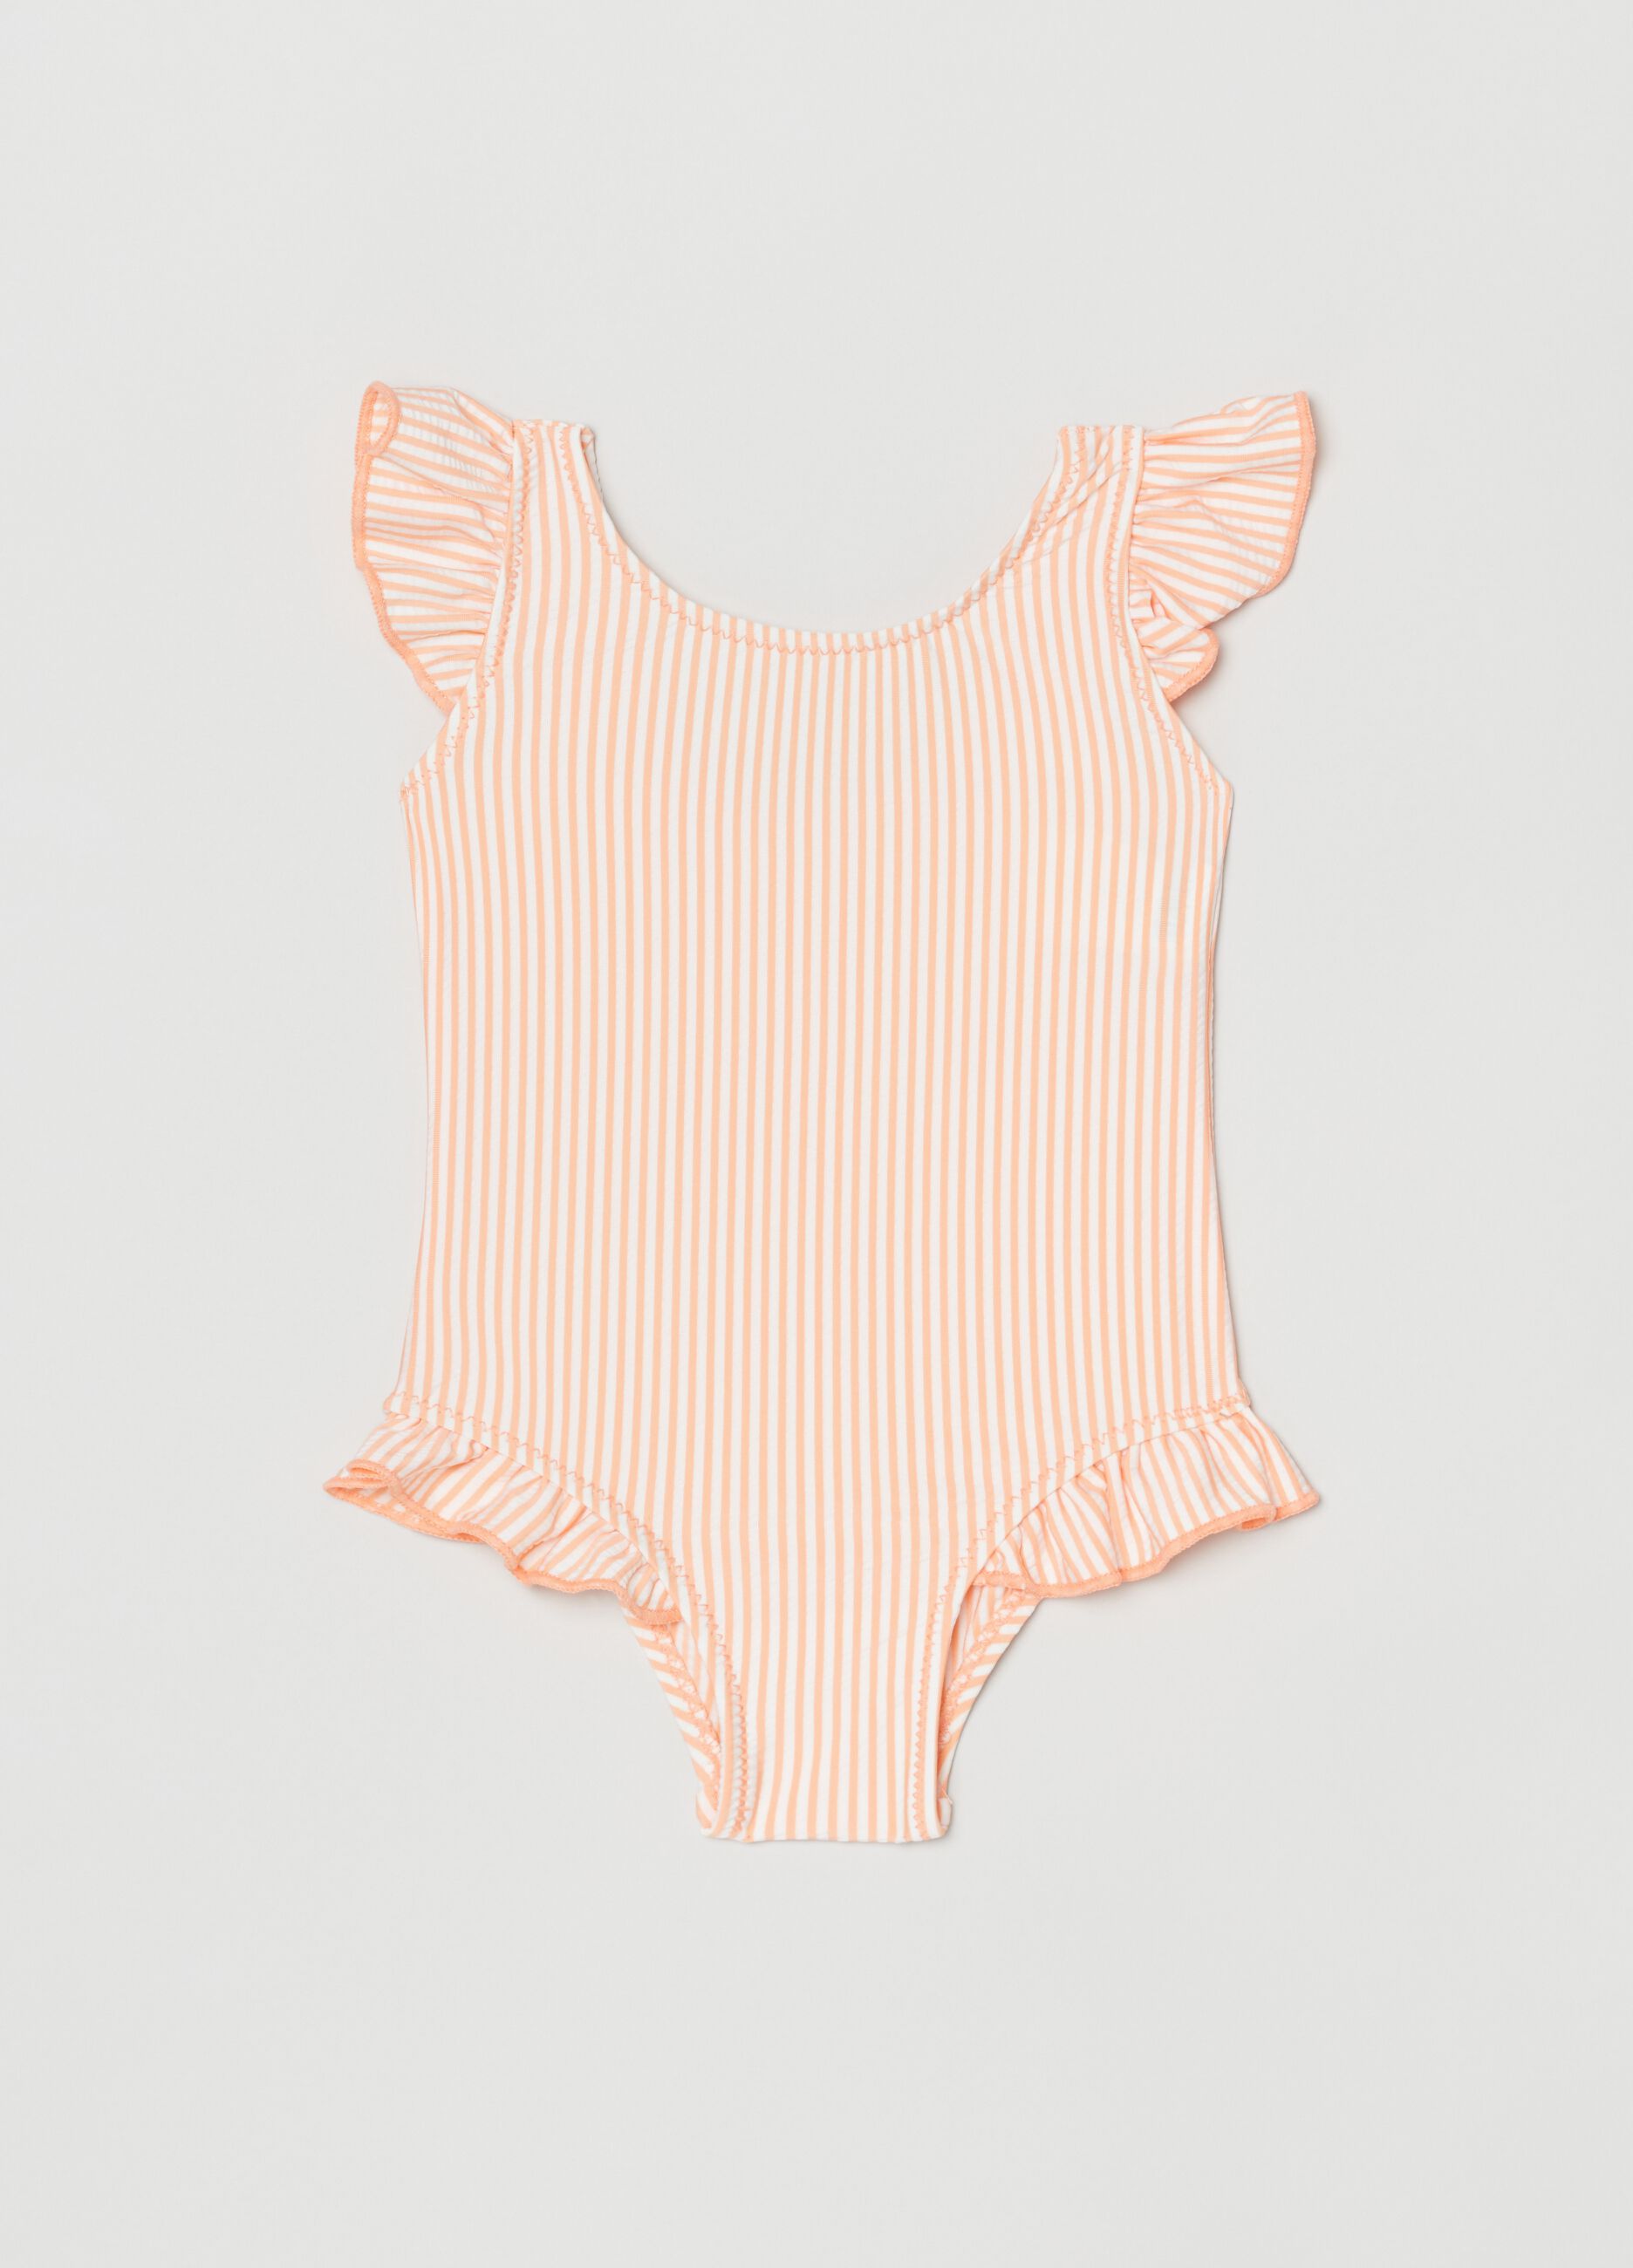 One-piece striped swimsuit